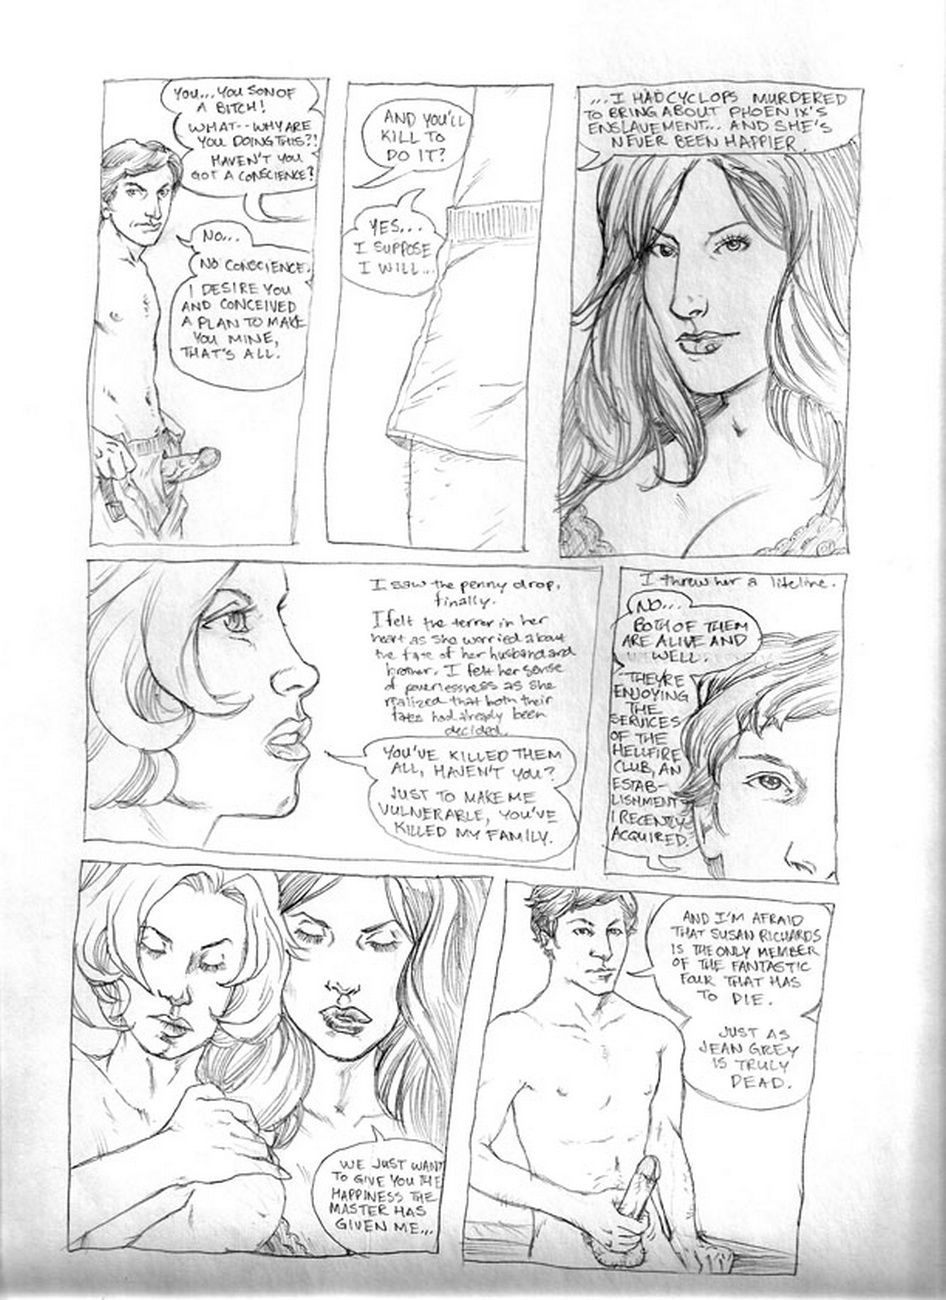 Submission Agenda 5 - The Invisible Woman page 12